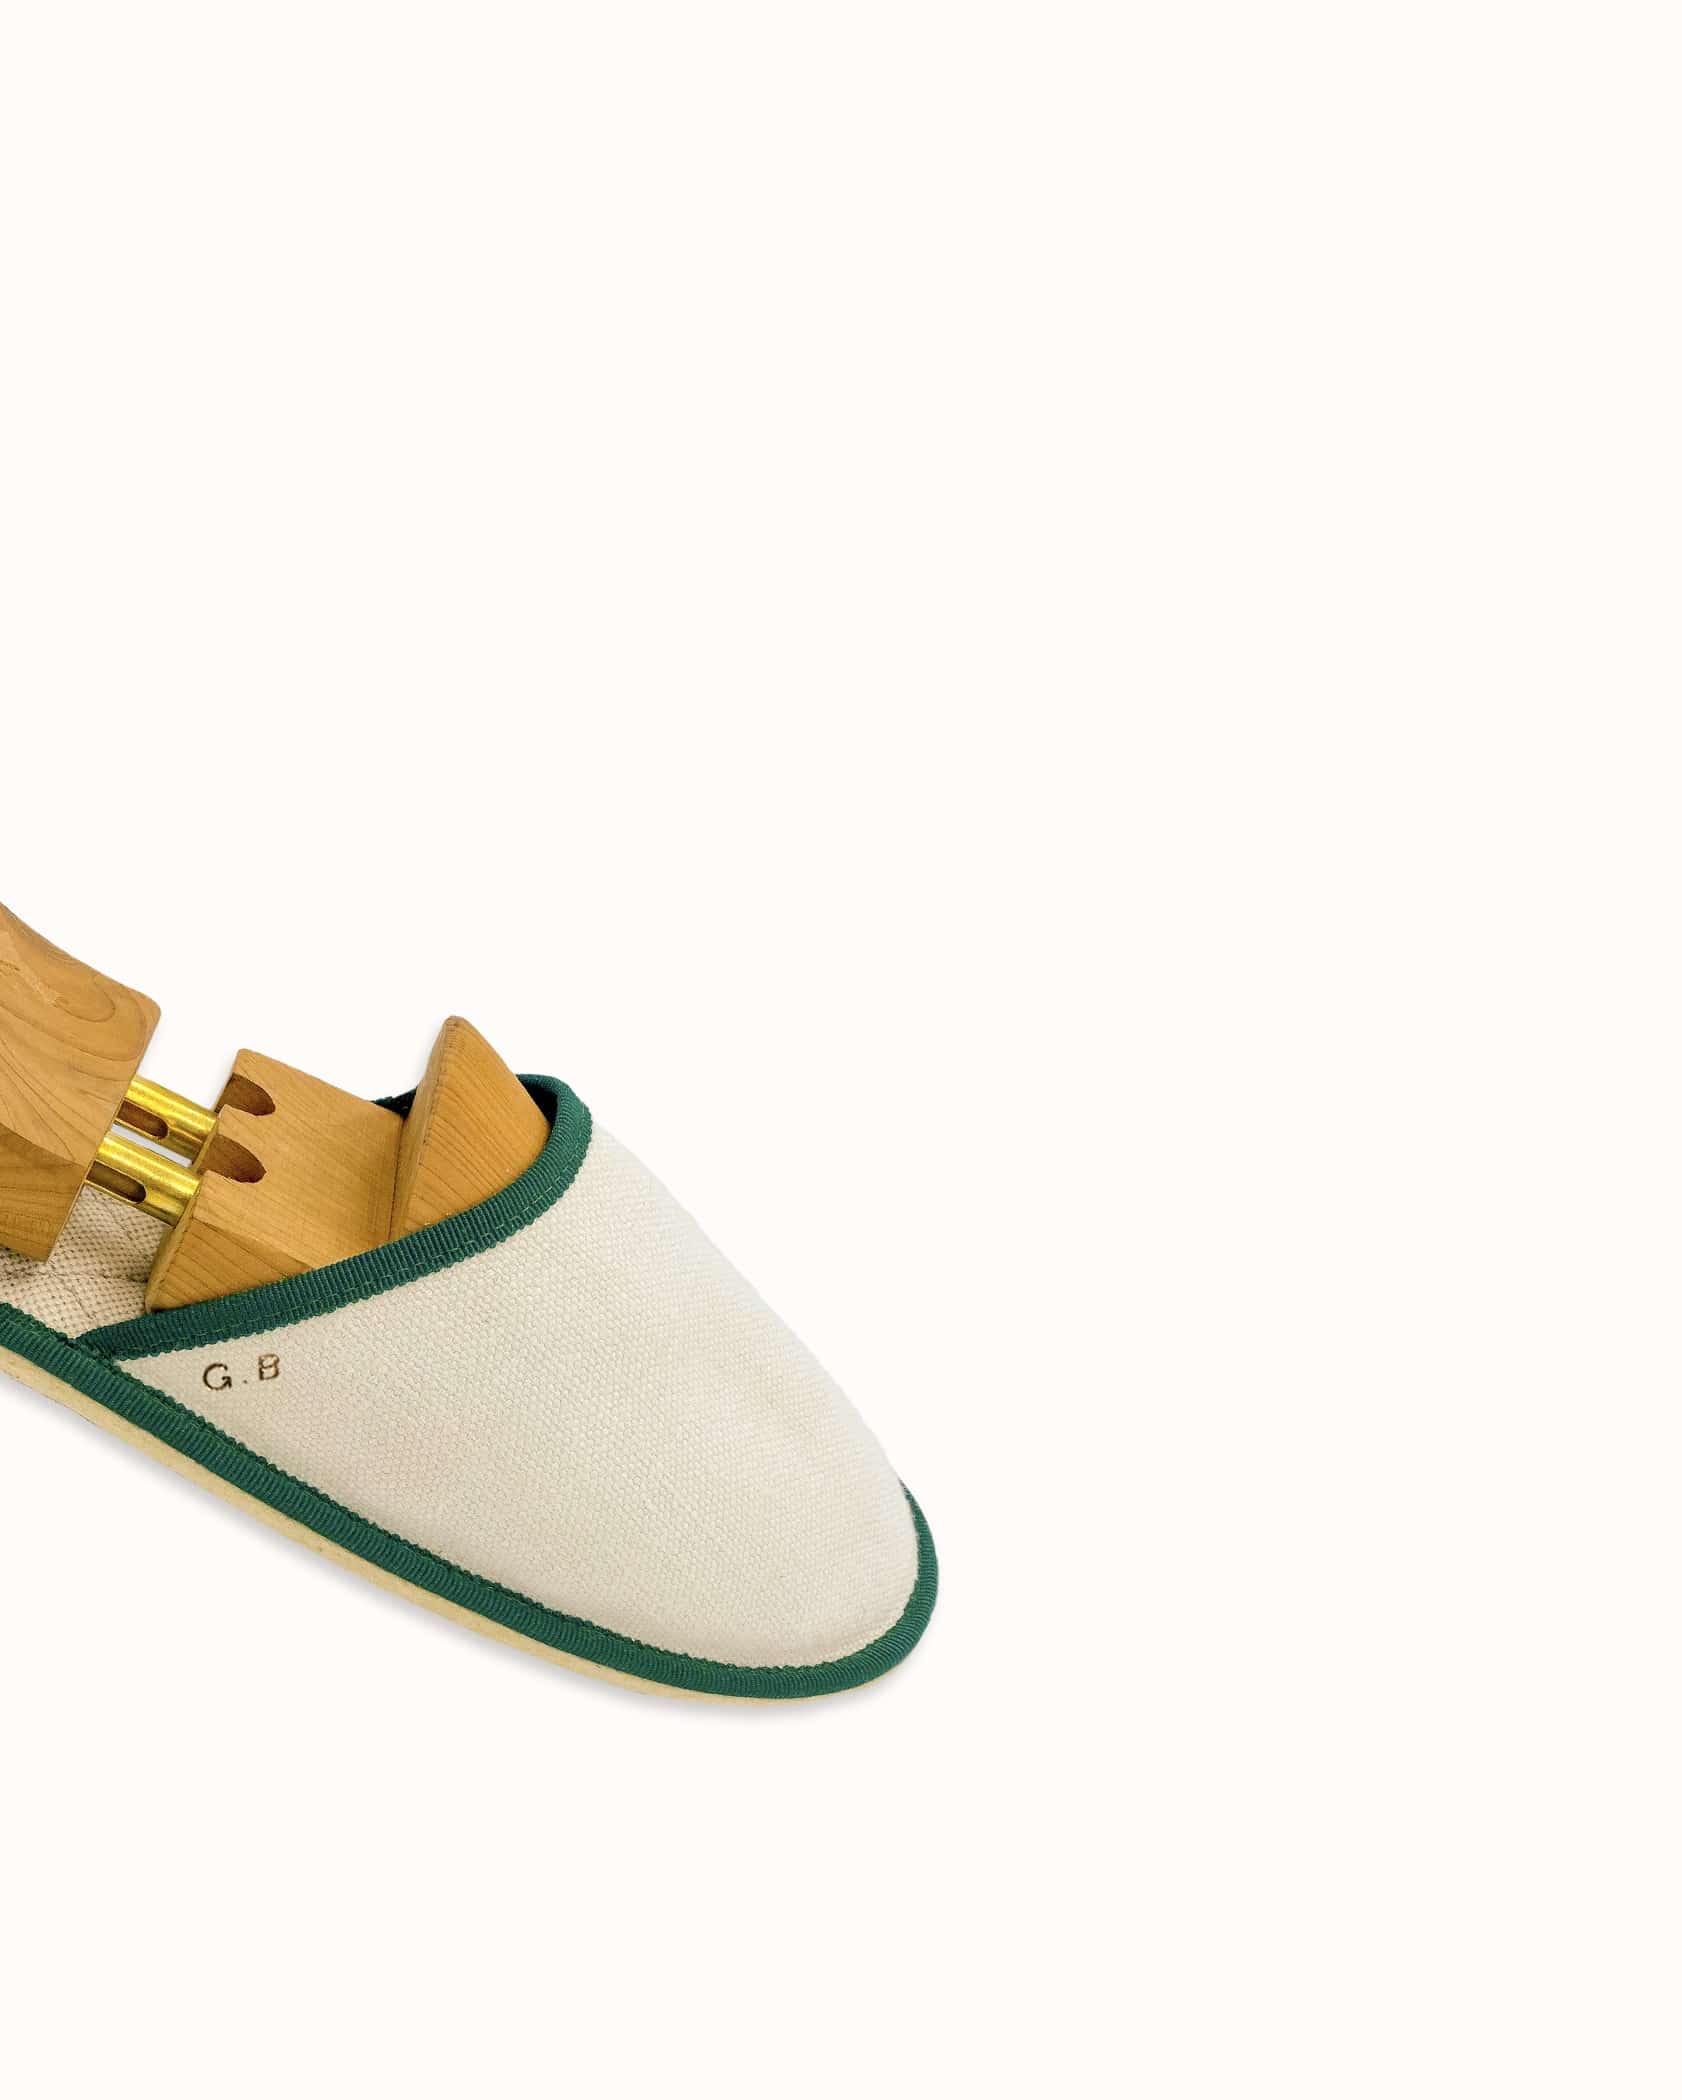 French slippers for men, women and kids. Le Spleen "Rayon Vert", beige and green. A slip-on like hotel slippers with a quilted padding and an outstanding craftsmanship manufacturing. Made in France.